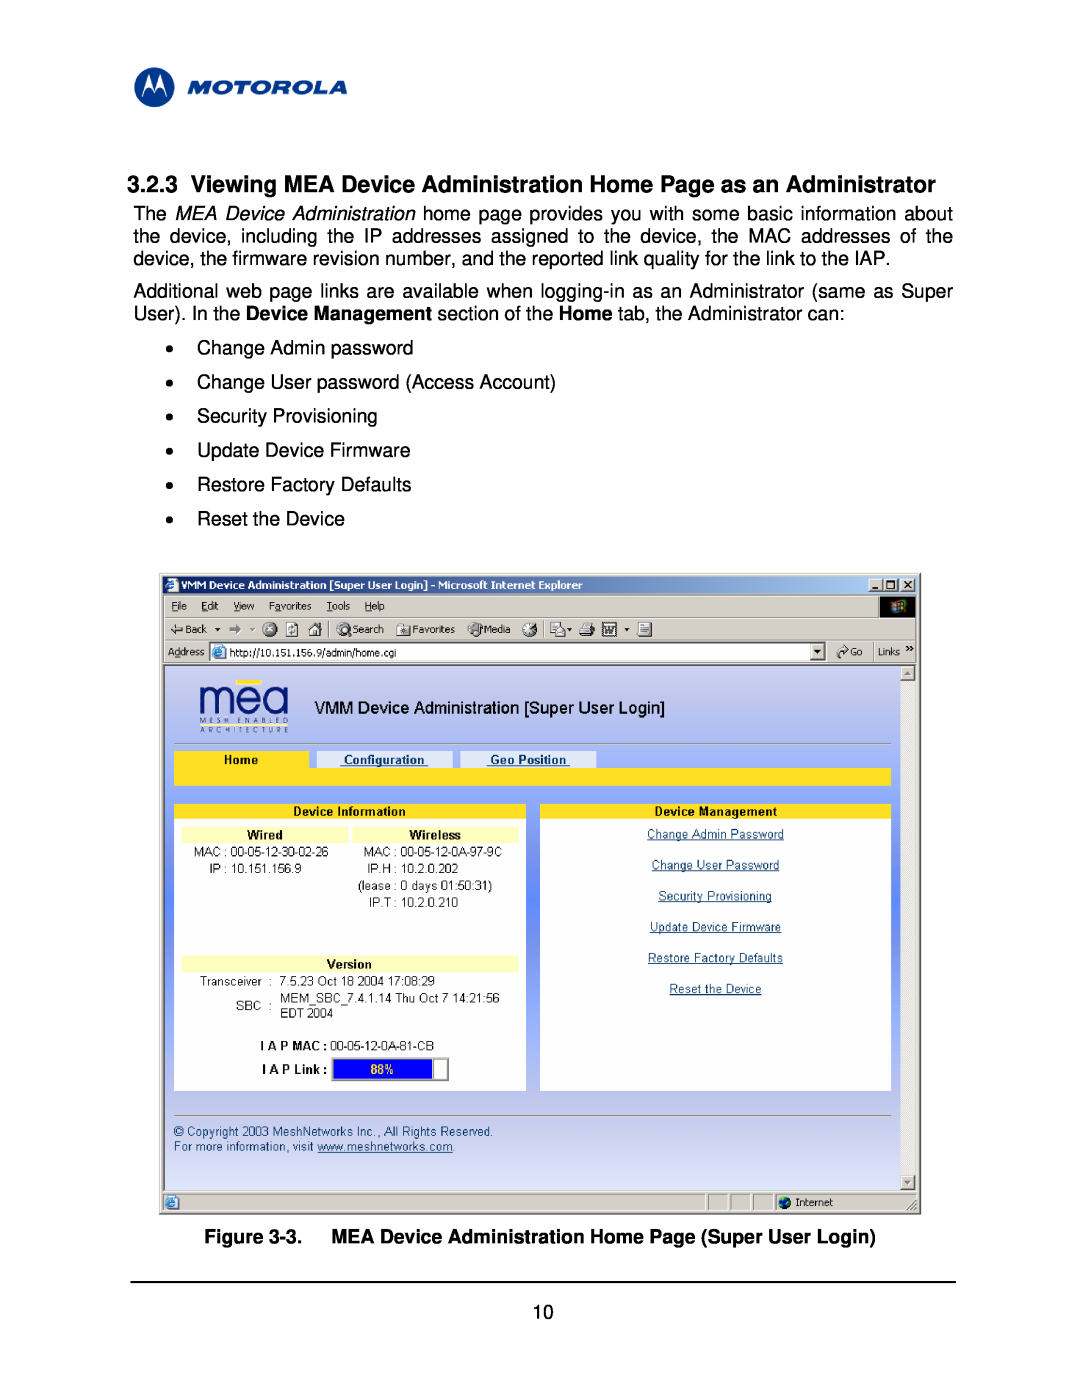 Motorola 3.1 manual Viewing MEA Device Administration Home Page as an Administrator 